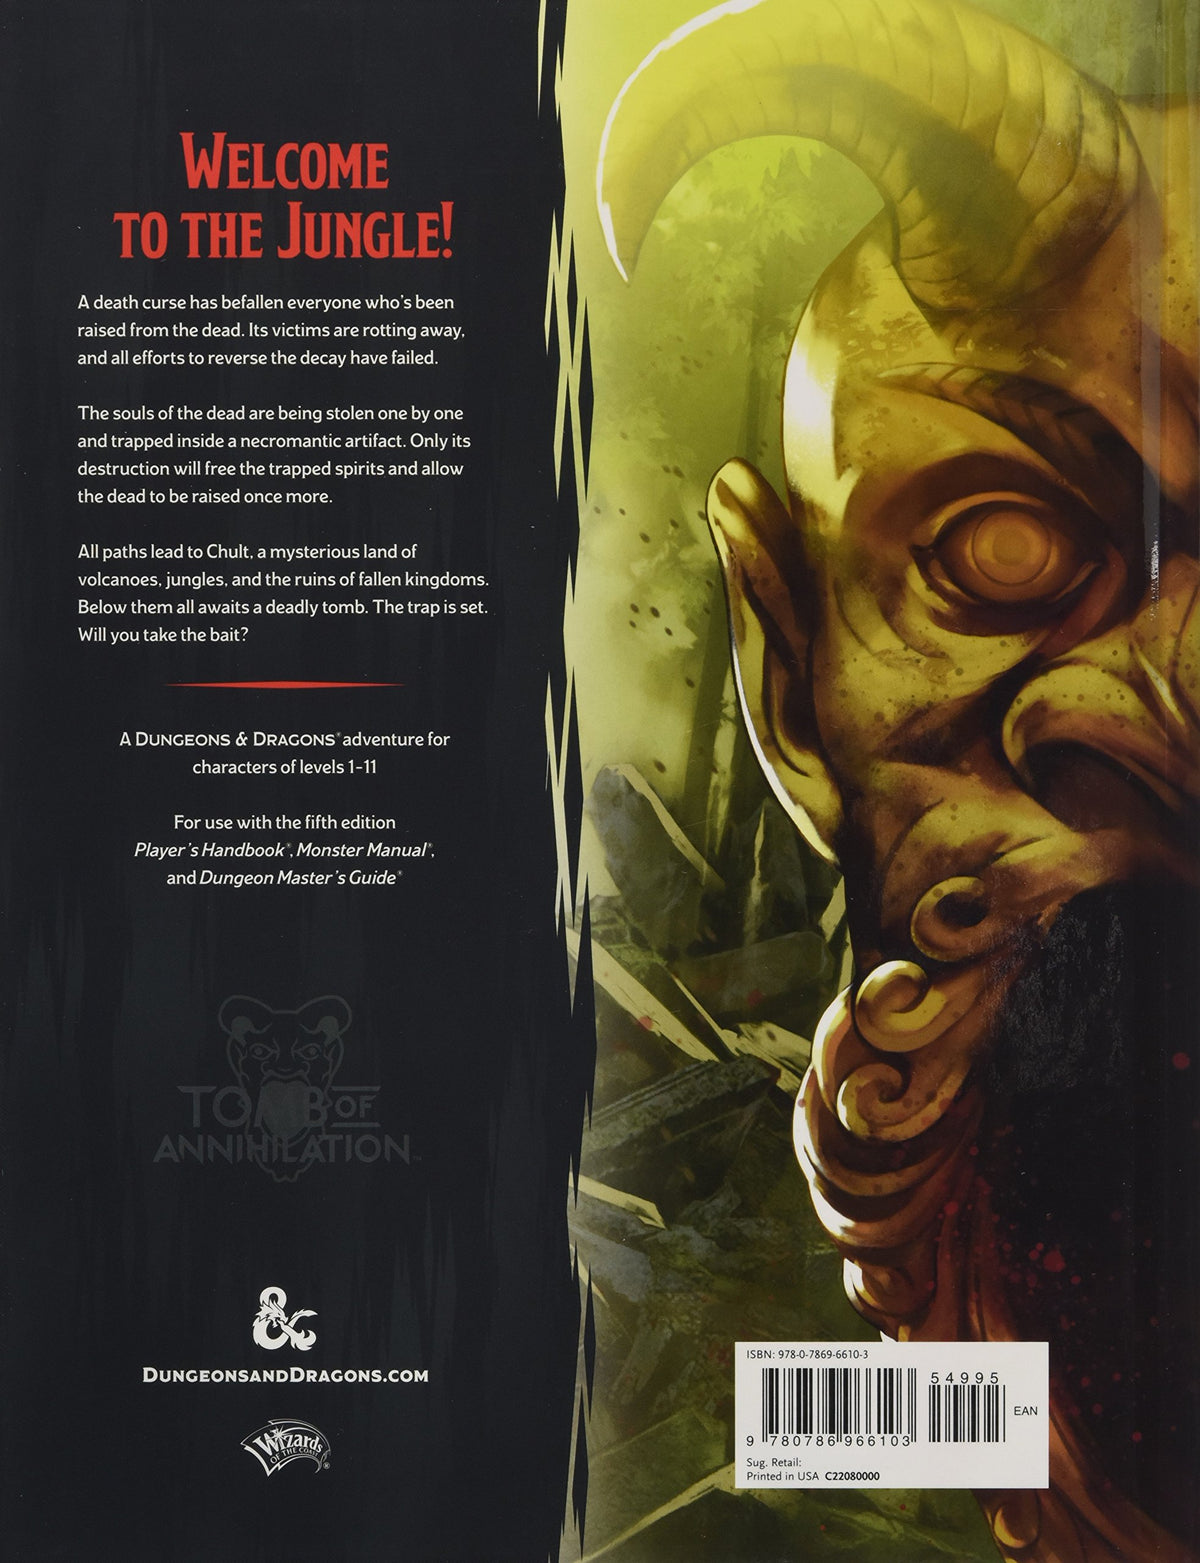 Dungeons &amp; Dragons Tomb Of Annihilation